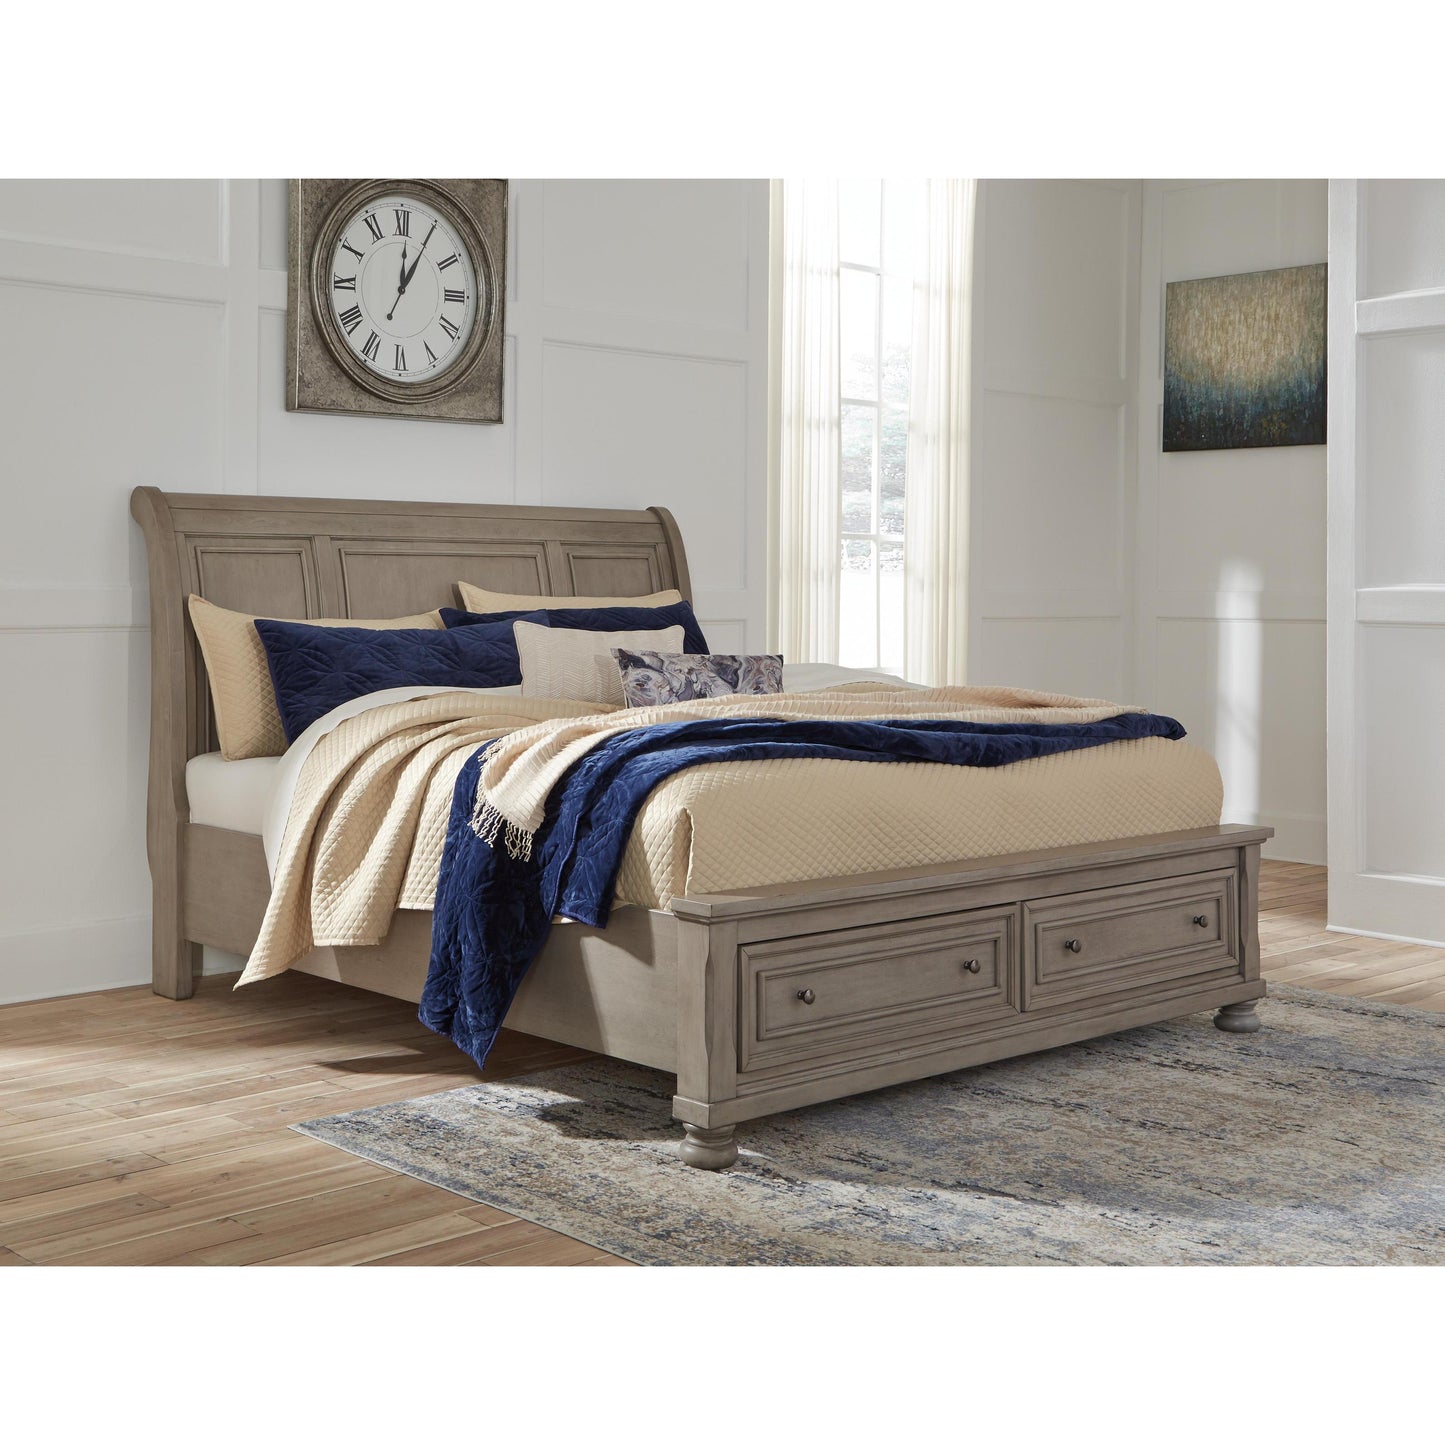 Signature Design by Ashley Lettner B733 8 pc Queen Sleigh Storage Bedroom Set IMAGE 2